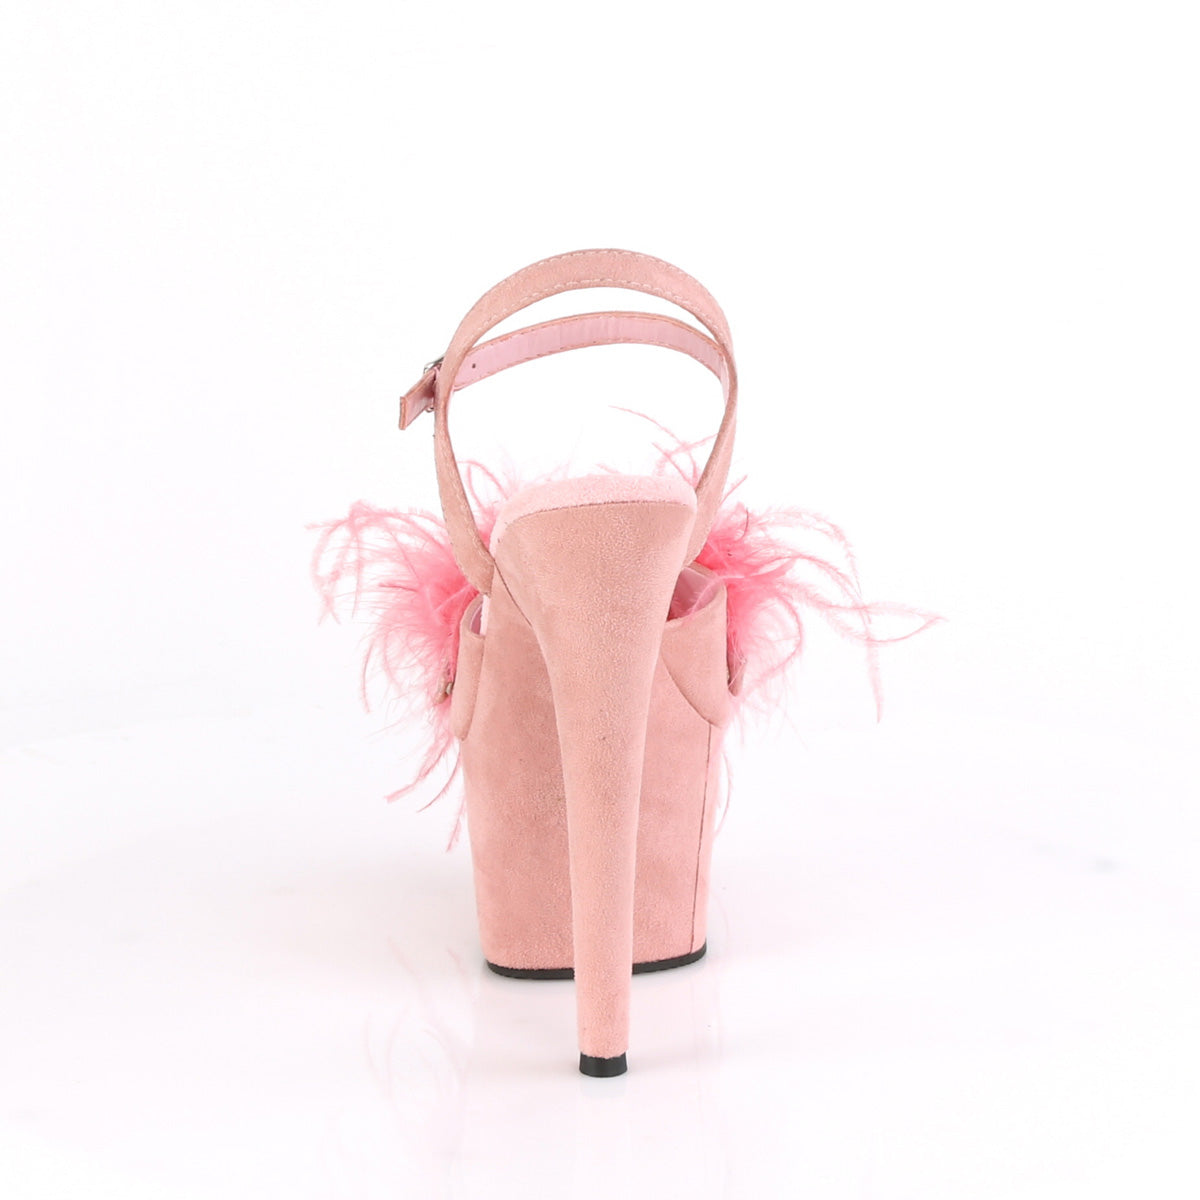 ADORE-709F Pleaser 7 Inch Heel Baby Pink Pole Dancing Shoes-Pleaser- Sexy Shoes Fetish Footwear